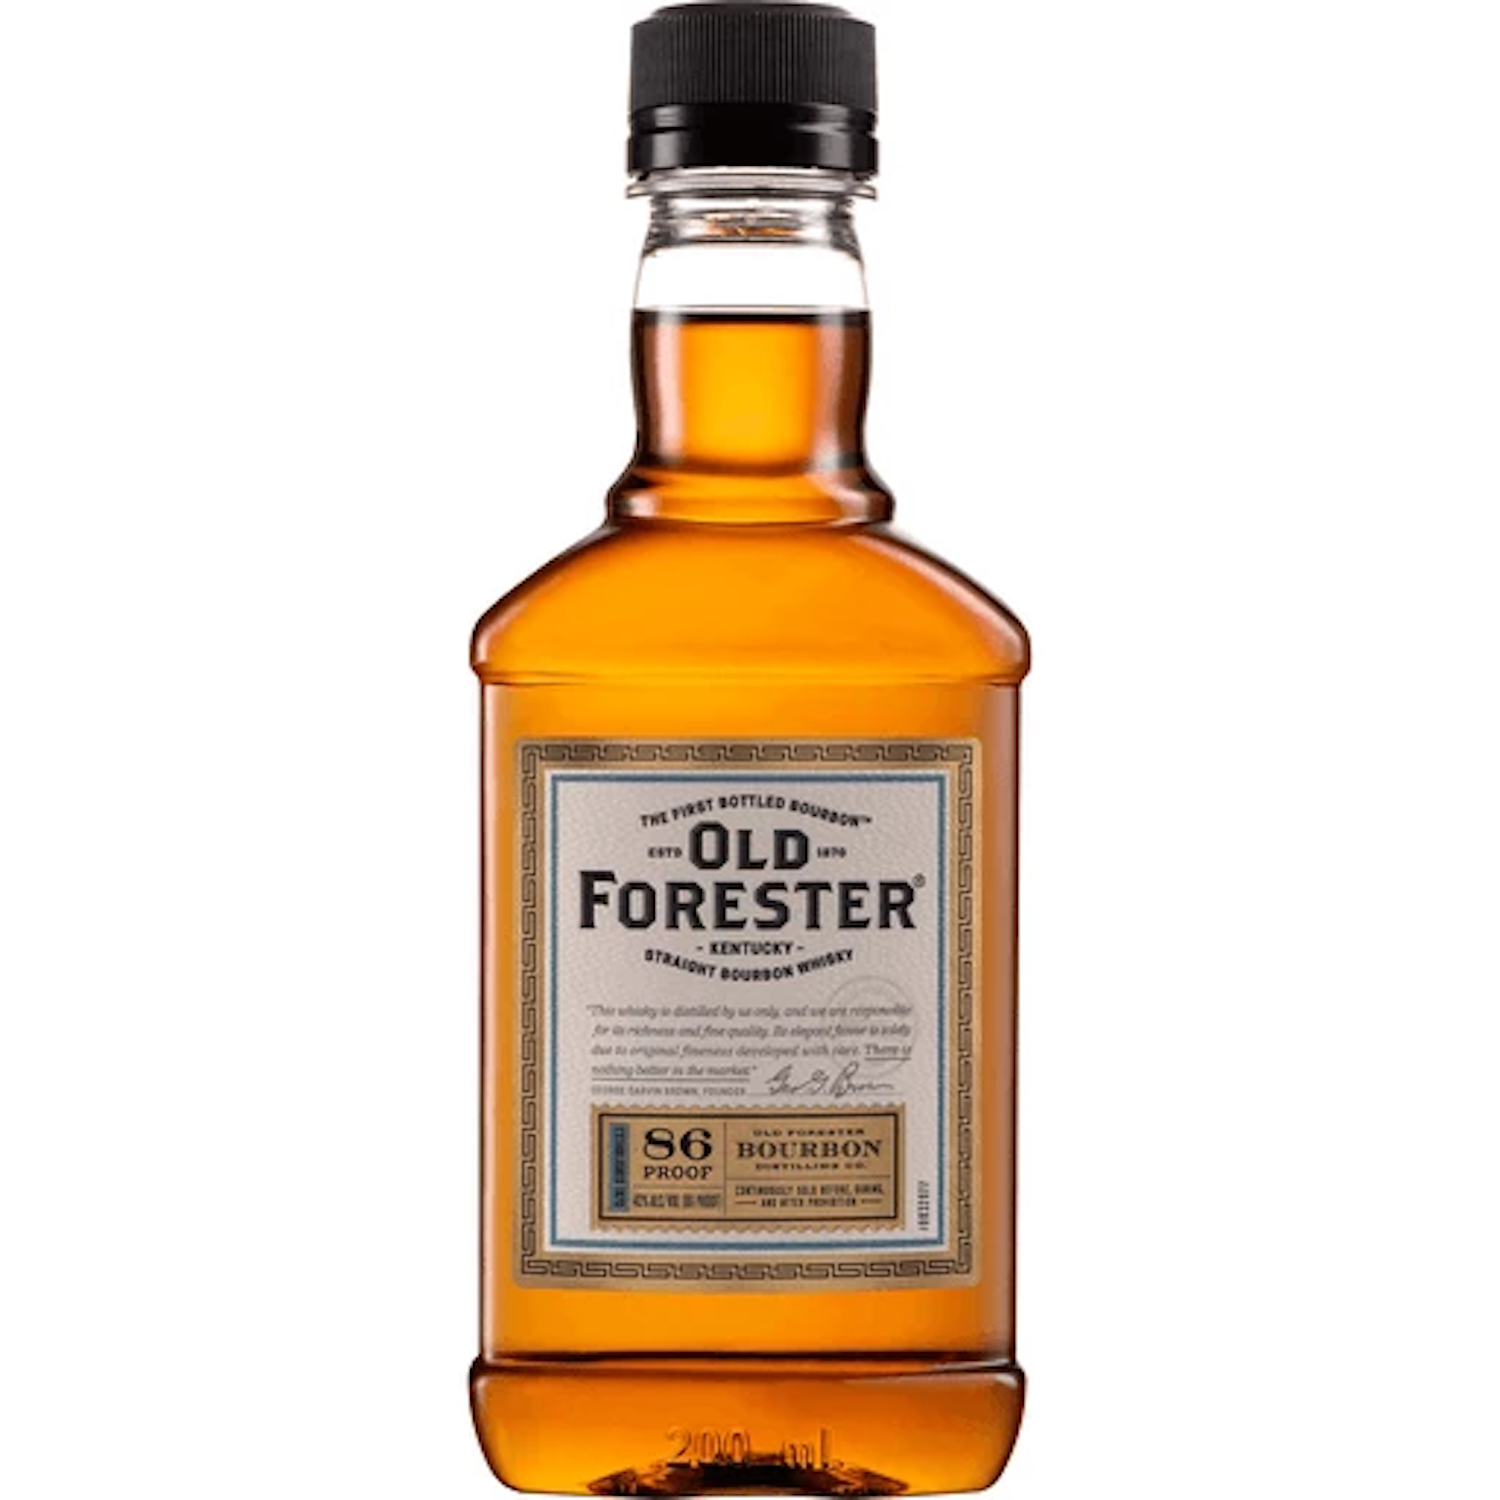 Old Forester Kentucky Straight Bourbon (86 Proof) 200mL